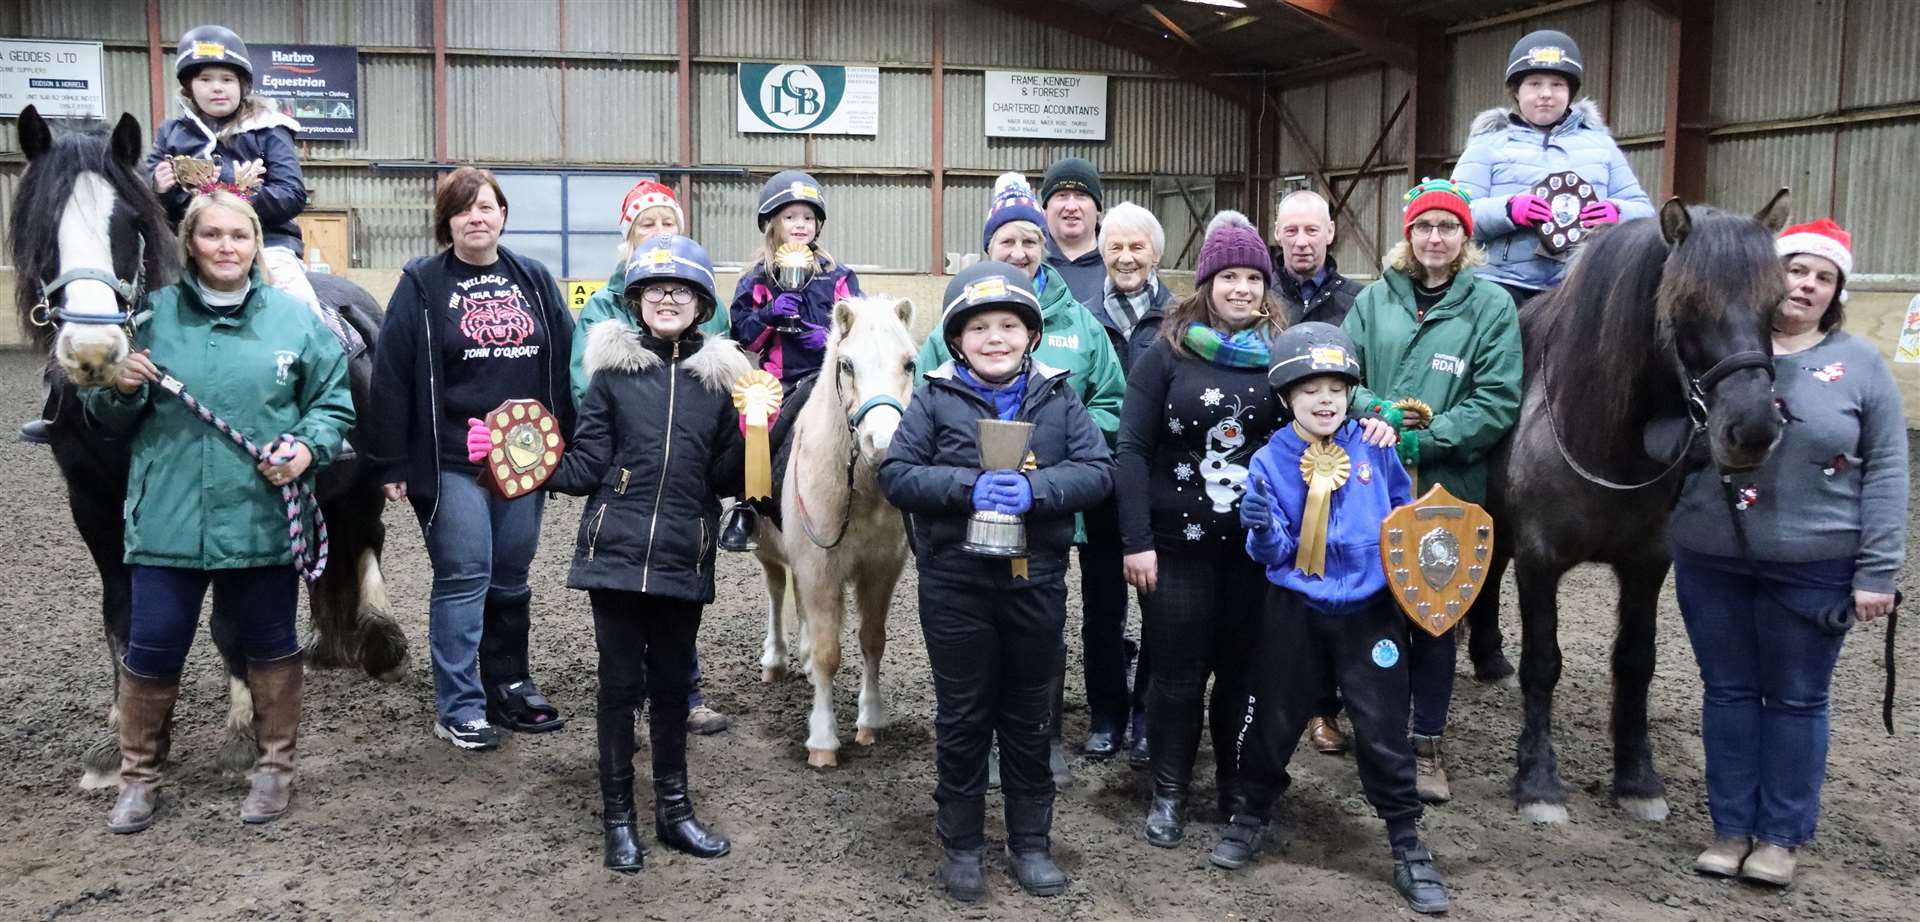 Prize winners from Ride 3 with coach Leeann Hope and helpers. The trophies and rosettes were presented by Jennifer Sutherland, James Moodie, Lodge St Peter, Colin Forsyth and Dottie Lyon (Team MCC). Picture: Neil Buchan